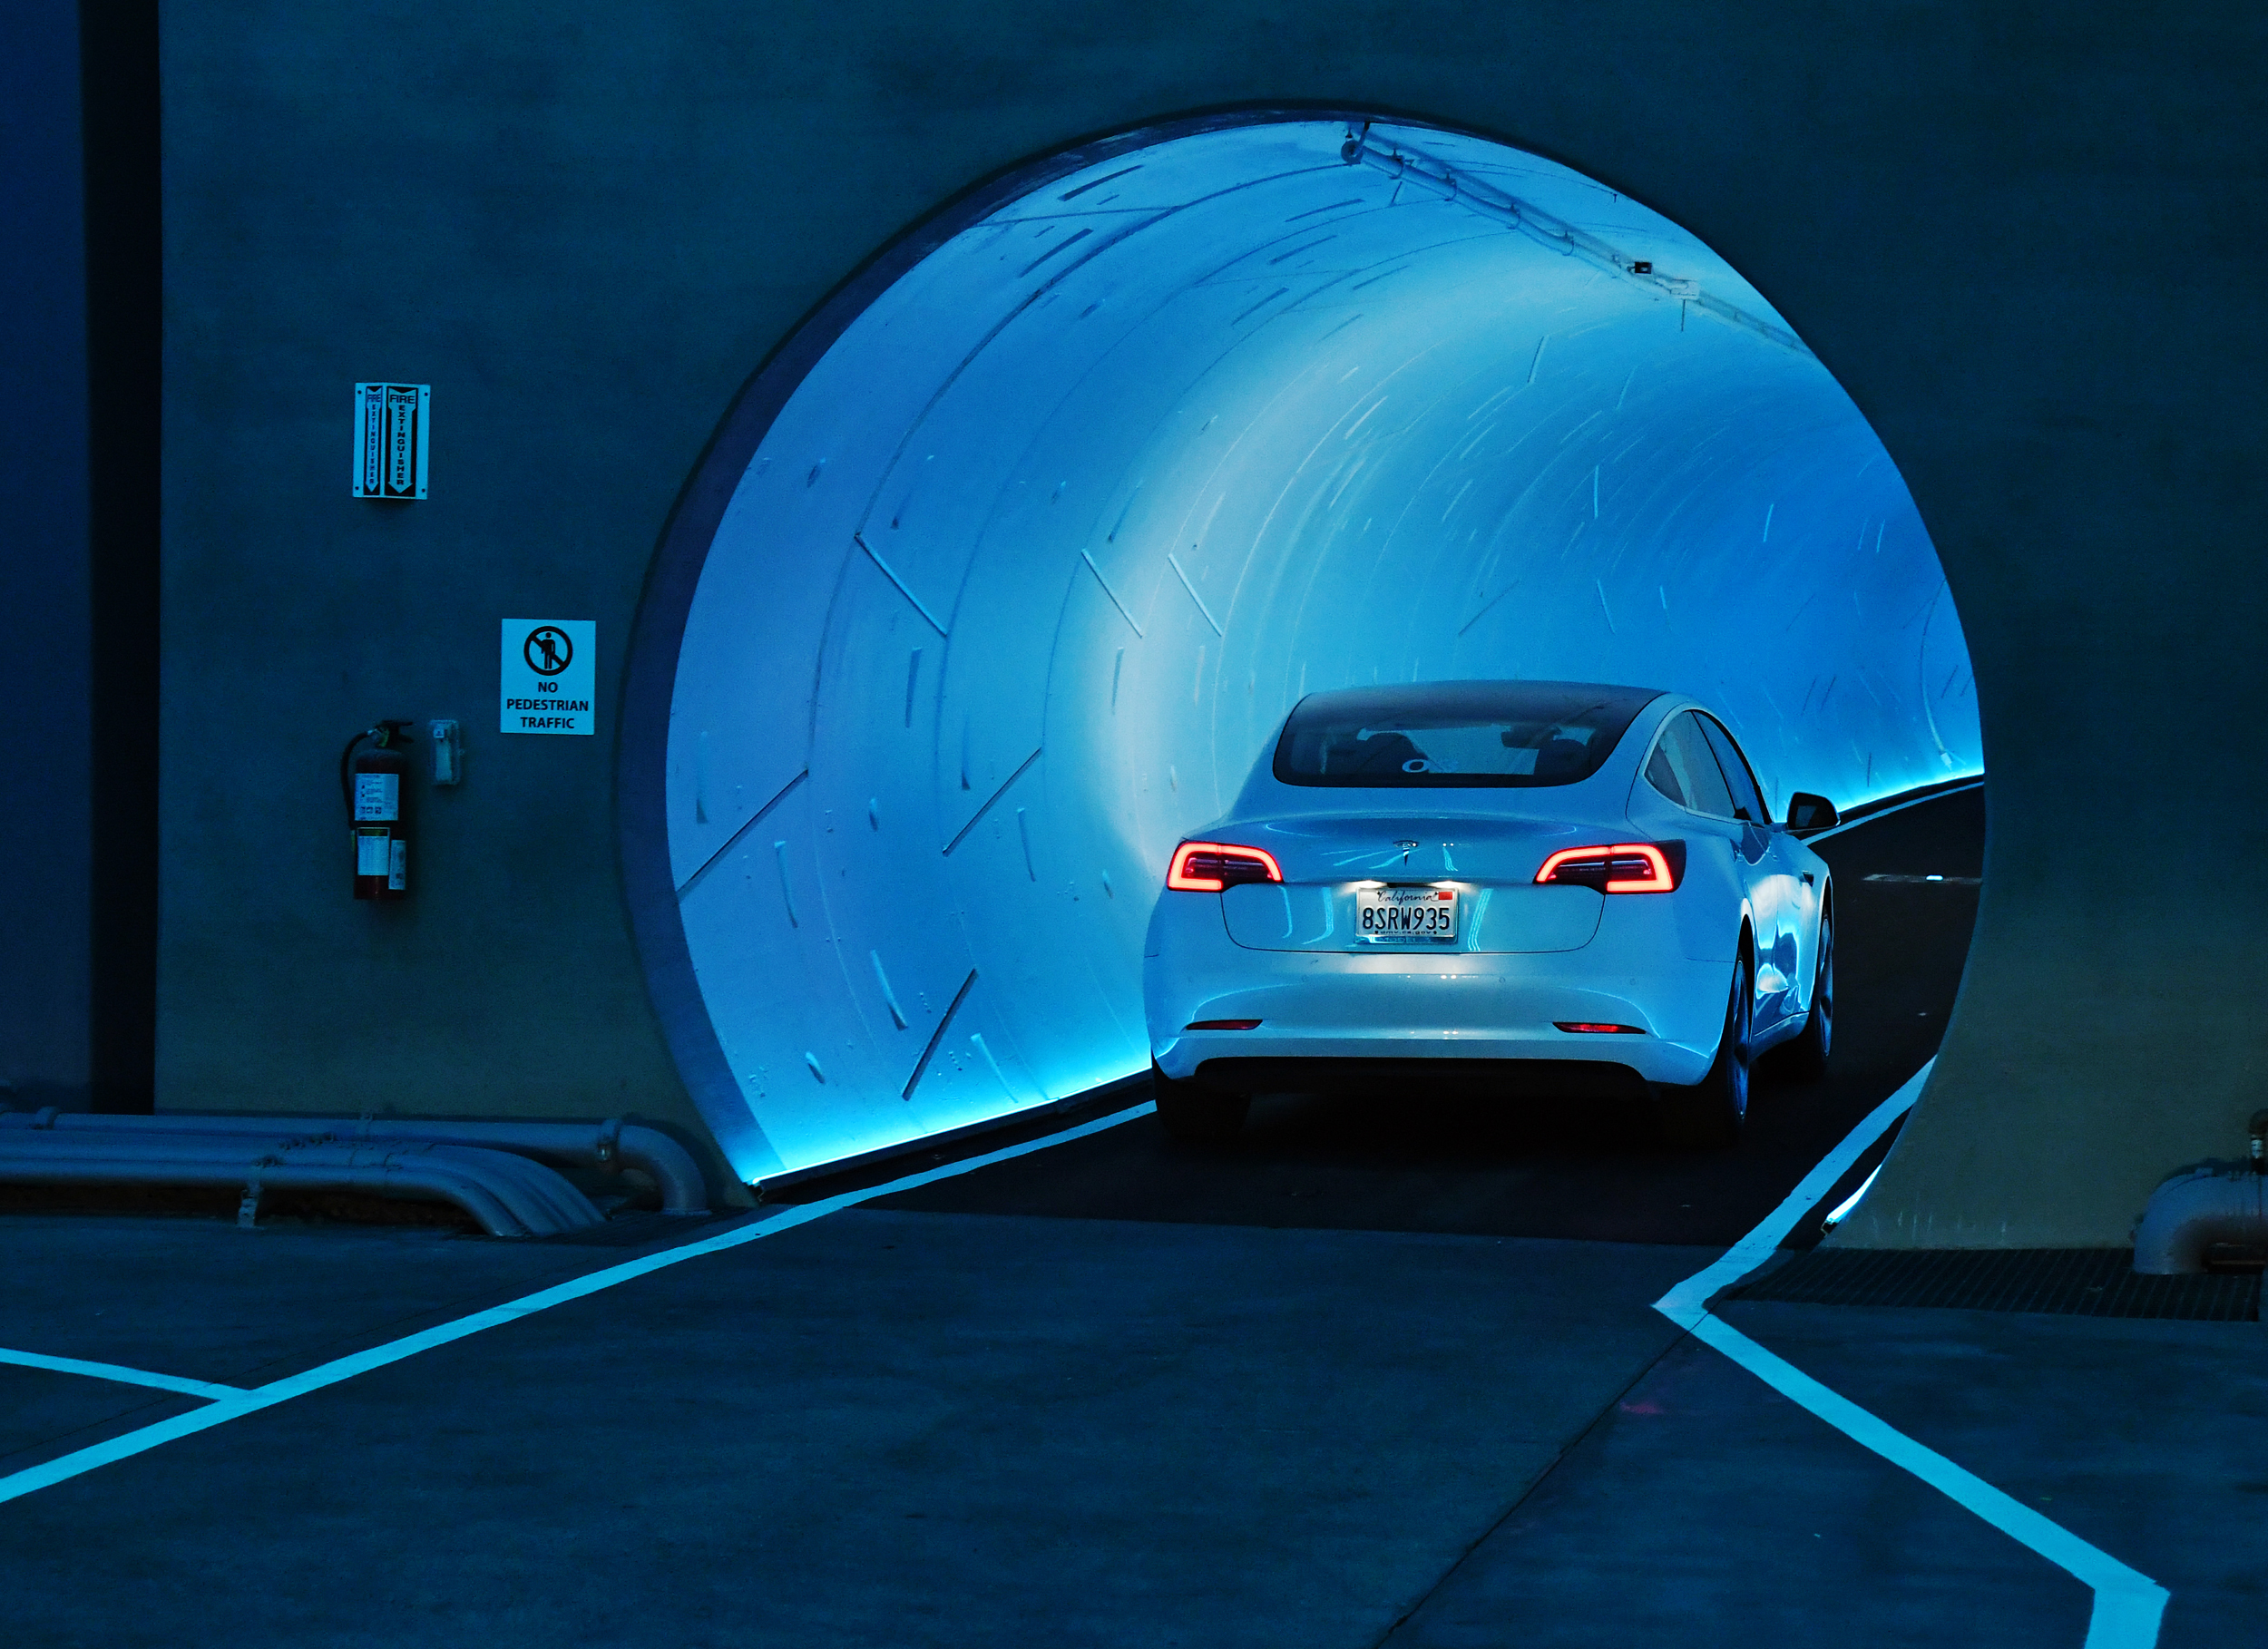 LAS VEGAS, NEVADA - APRIL 09: A Tesla car drives through a tunnel in the Central Station during a media preview of the Las Vegas Convention Center Loop on April 9, 2021 in Las Vegas, Nevada. The Las Vegas Convention Center Loop is an underground transportation system that is the first commercial project by Elon Musk’s The Boring Company. The USD 52.5 million loop, which includes two one-way vehicle tunnels 40 feet beneath the ground and three passenger stations, will take convention attendees across the 200-acre convention campus for free in all-electric Tesla vehicles in under two minutes. To walk that distance can take upward of 25 minutes. The system is designed to carry 4,400 people per hour using a fleet of 62 vehicles at maximum capacity. It is scheduled to be fully operational in June when the facility plans to host its first large-scale convention since the COVID-19 shutdown. There are plans to expand the system throughout the resort corridor in the future. (Photo by Ethan Miller/Getty Images)